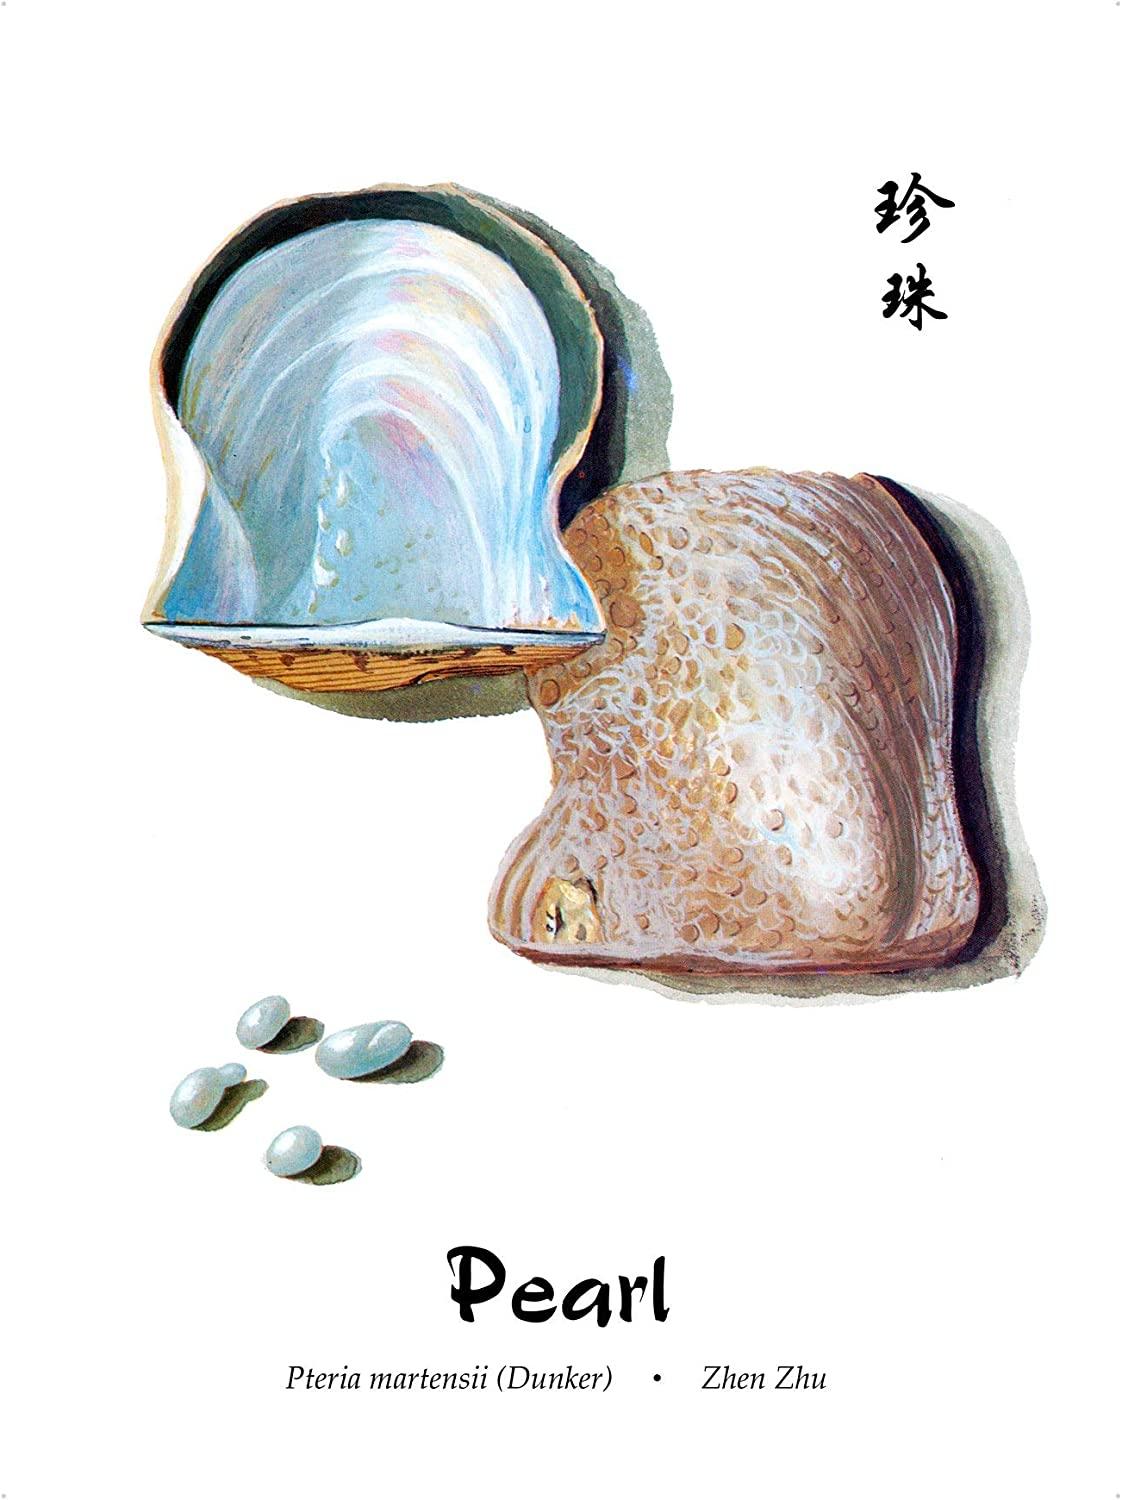 Dragon Herbs - Pearl Capsules - Pure Pearl Powder Supplement to Support  Skin, Eyes, Mood, Anxiety, Stress | All Natural Ingredients, Non-GMO (100